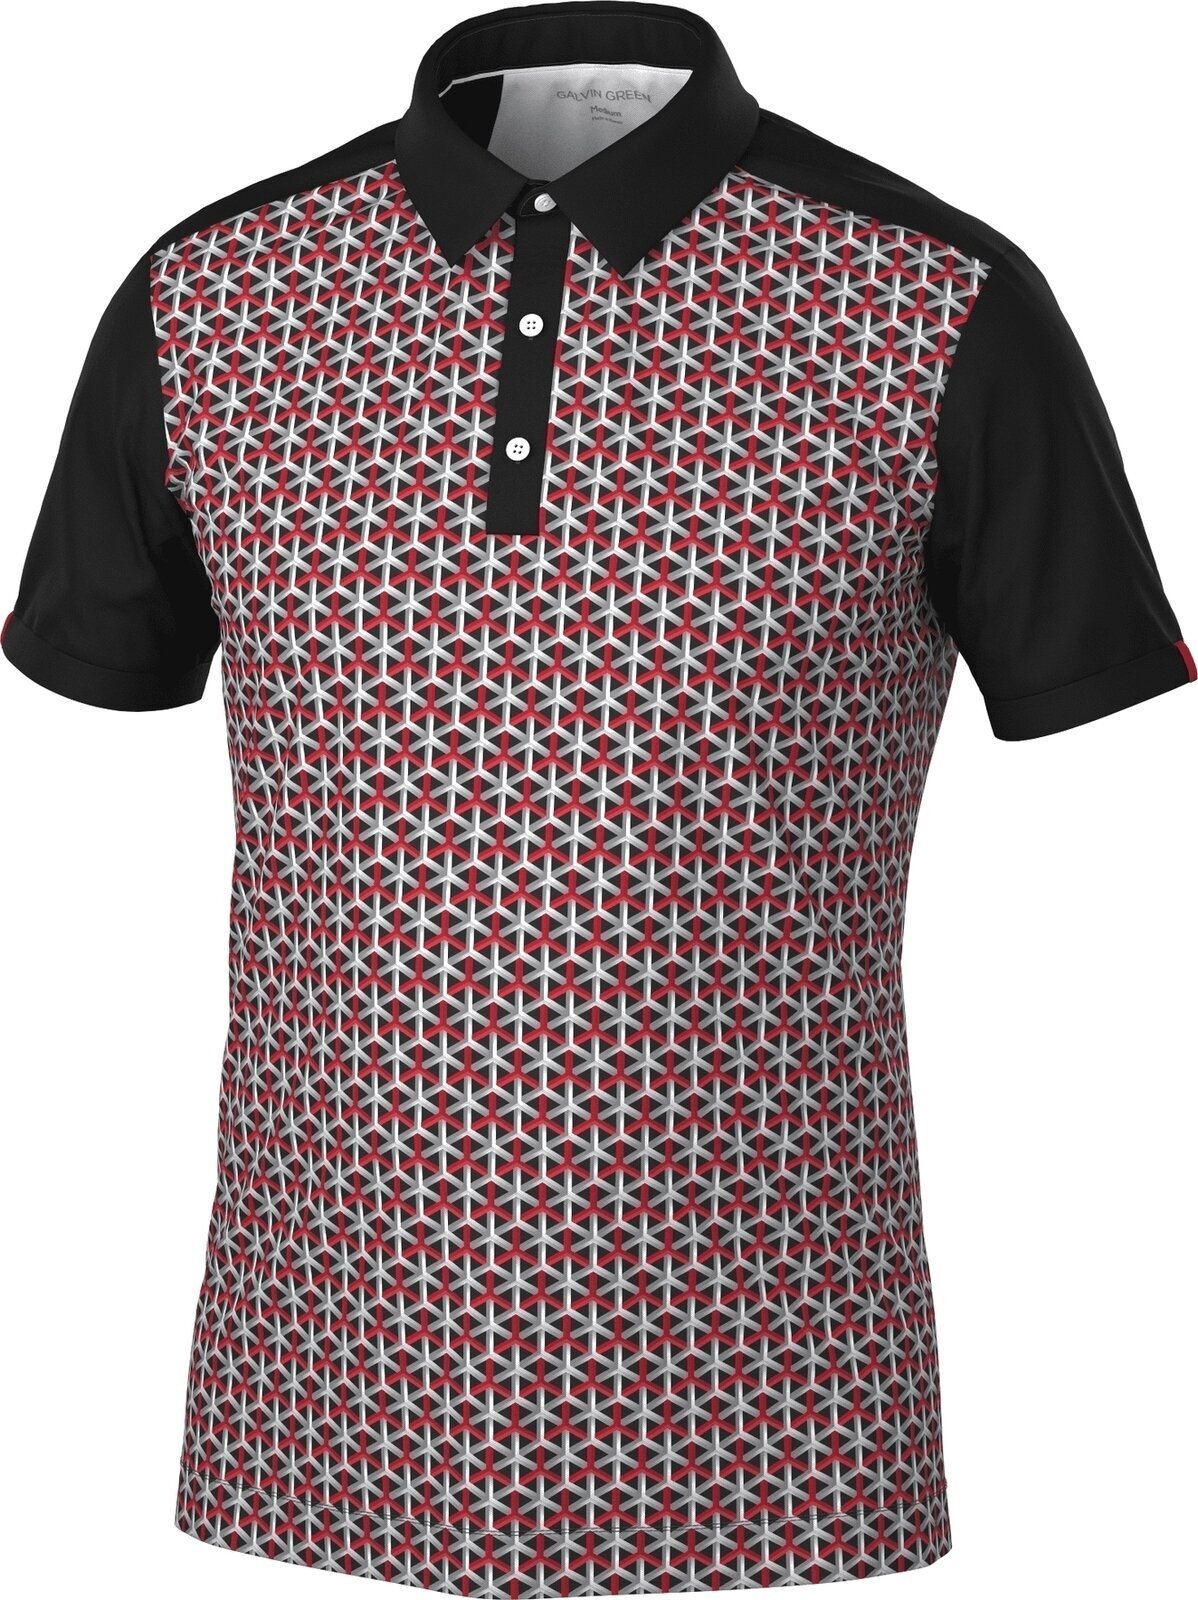 Polo košile Galvin Green Mio Mens Breathable Short Sleeve Shirt Red/Black M